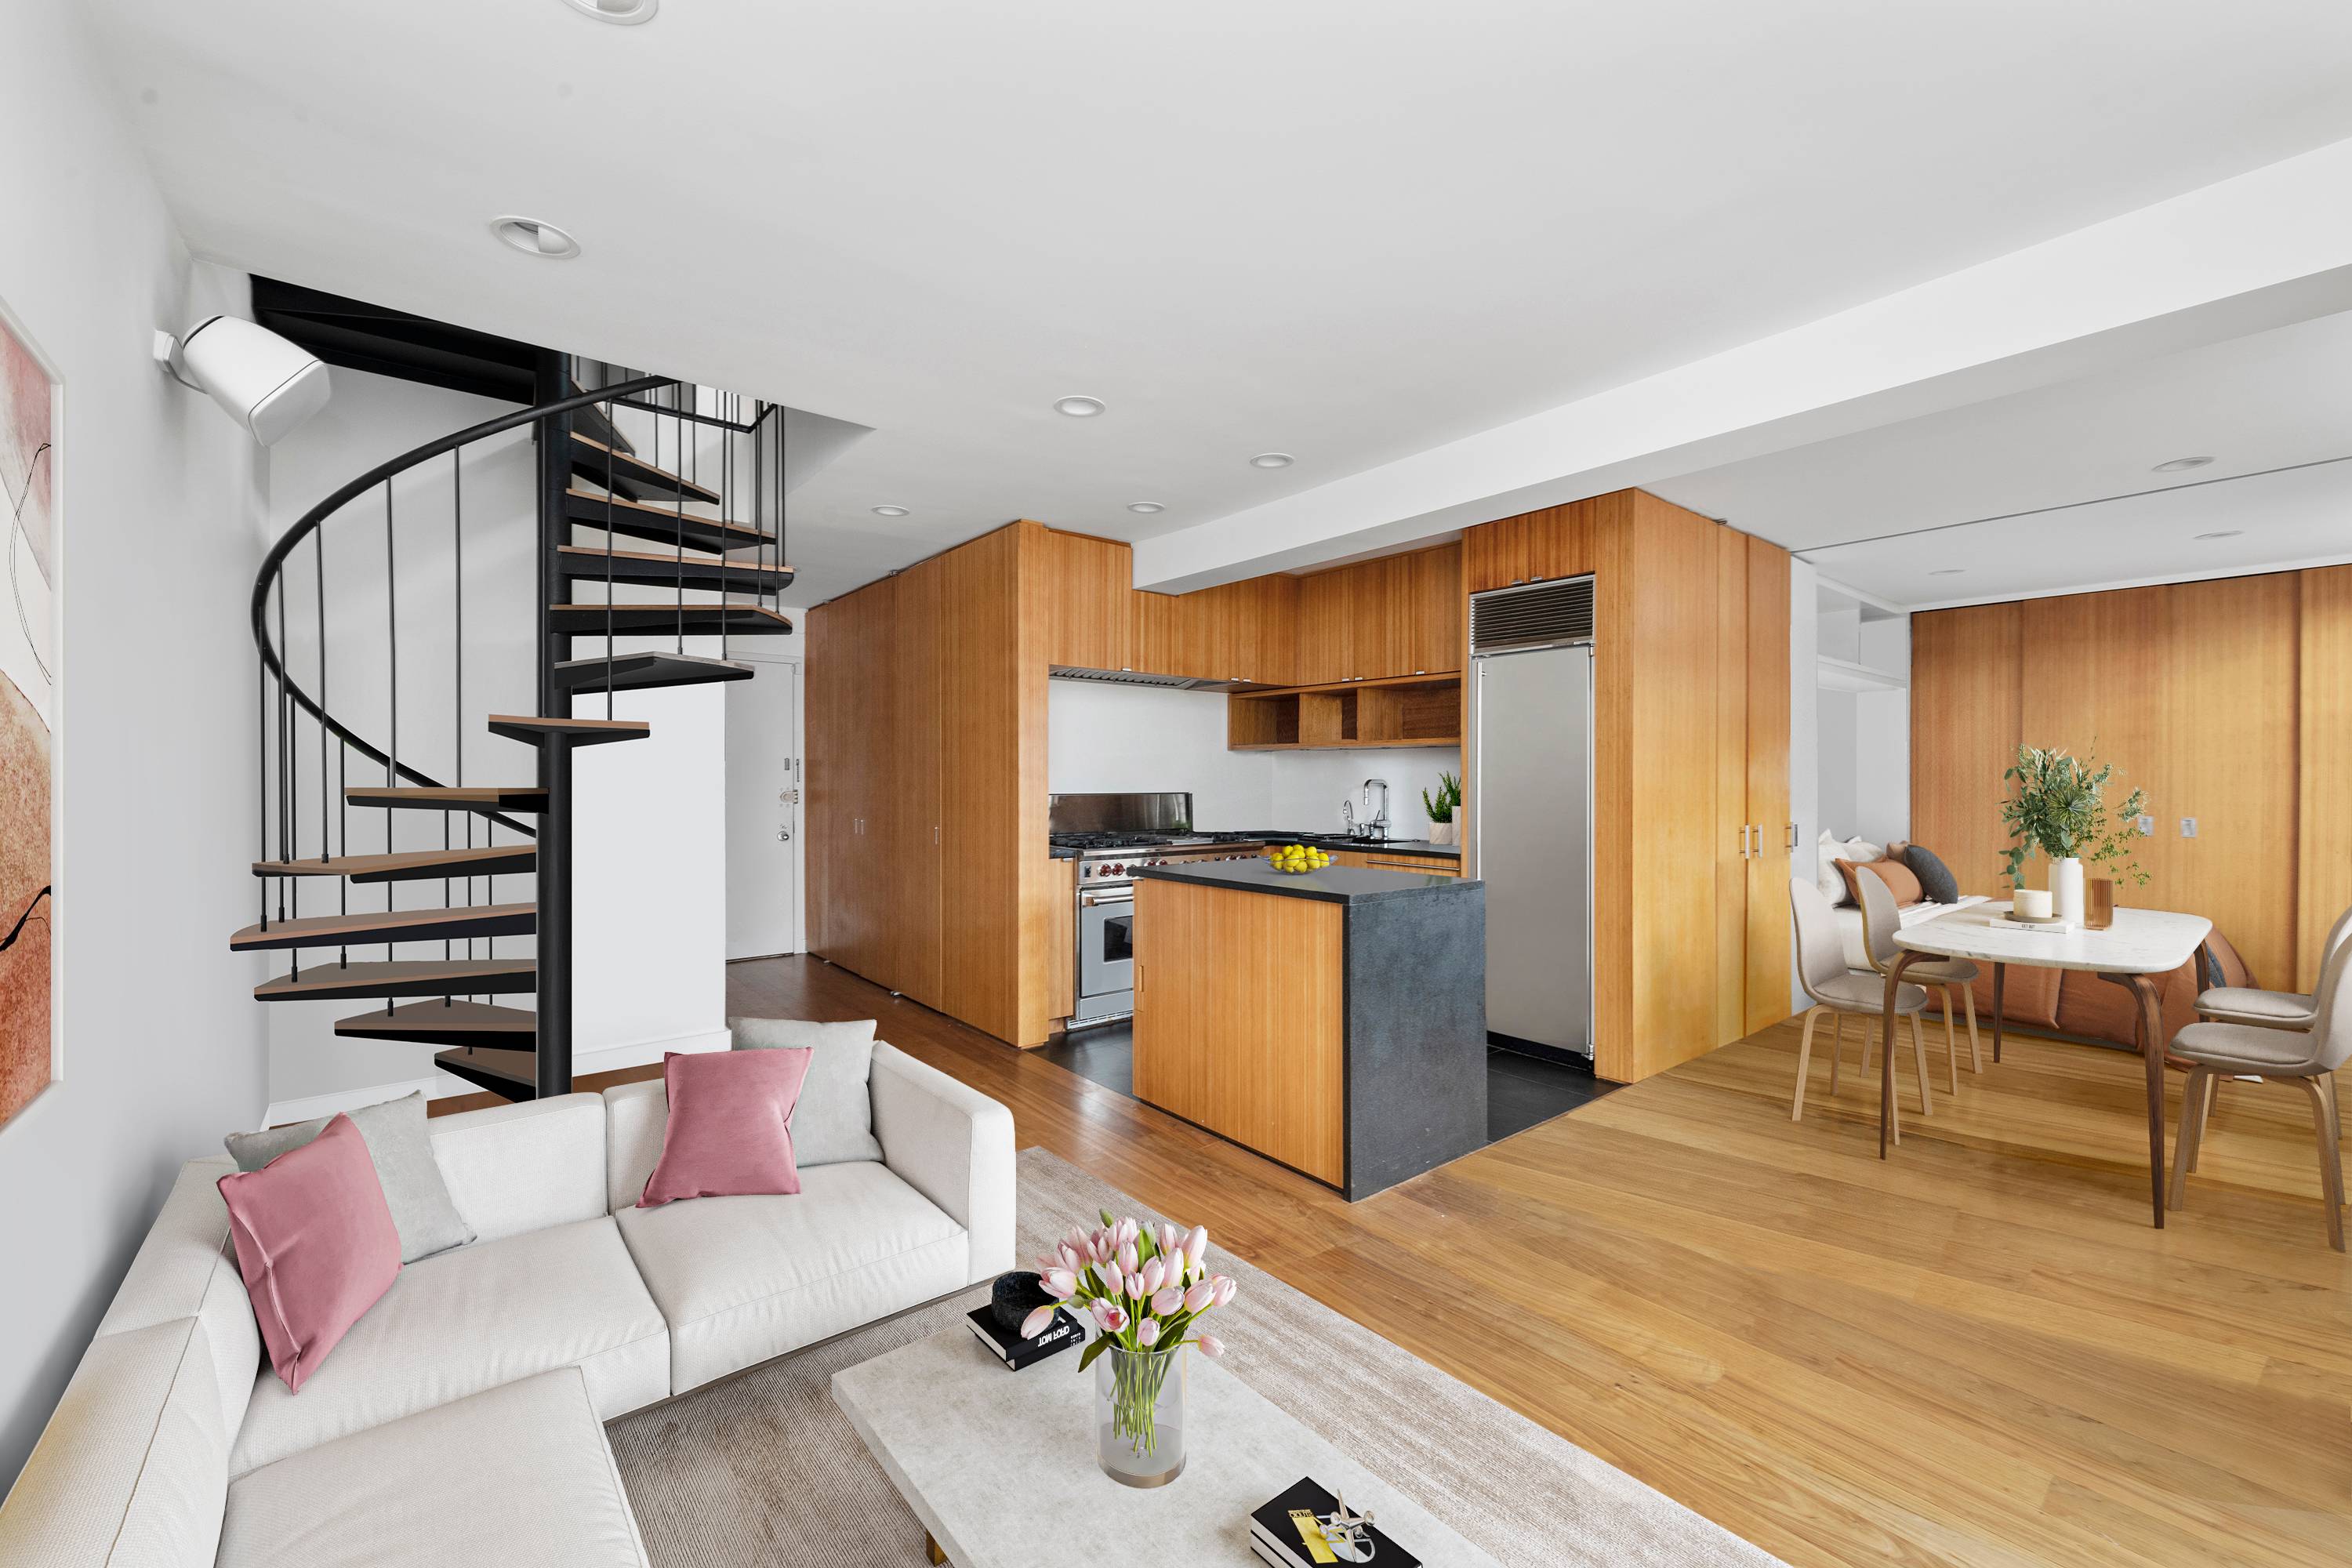 Skylight Penthouse Duplex w Private Rooftop and Custom Finishes Welcome to this one of a kind duplex penthouse with private outdoor space and high end customizations throughout, a gut renovated ...